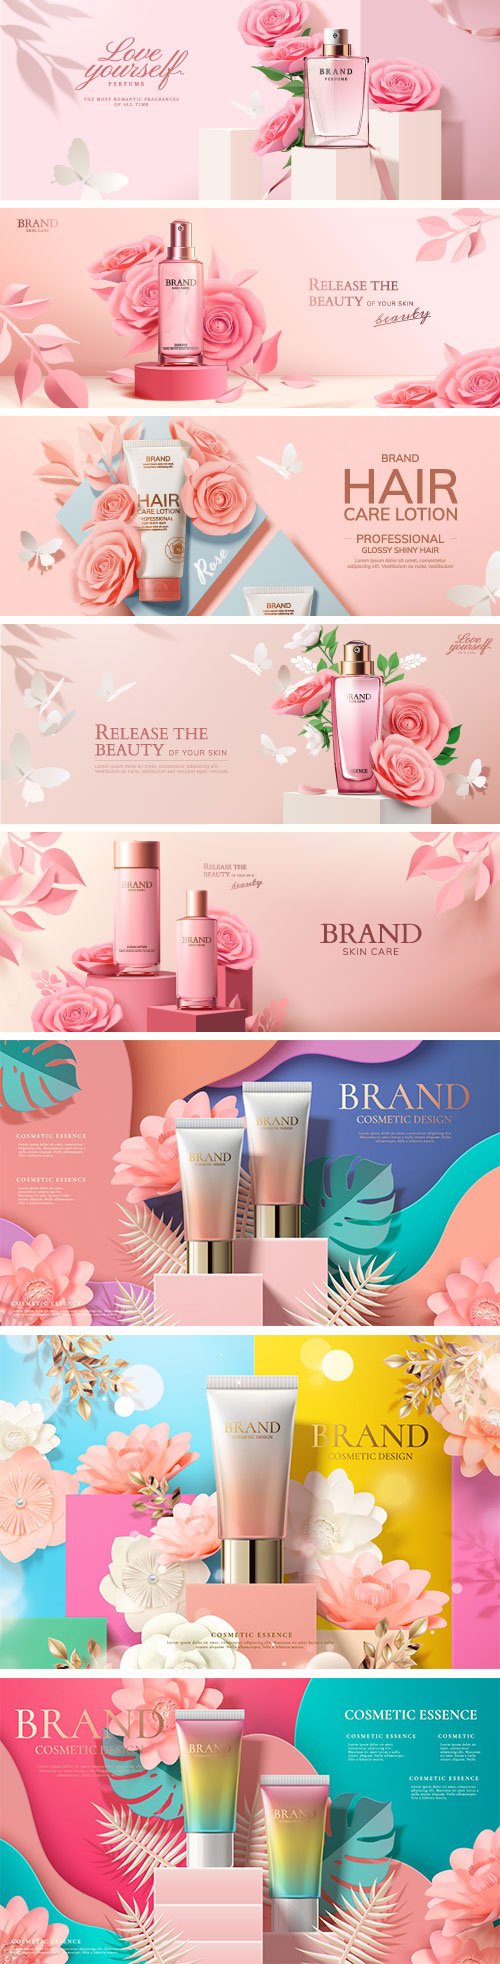 Brand cosmetic design, foundation banner ads # 7